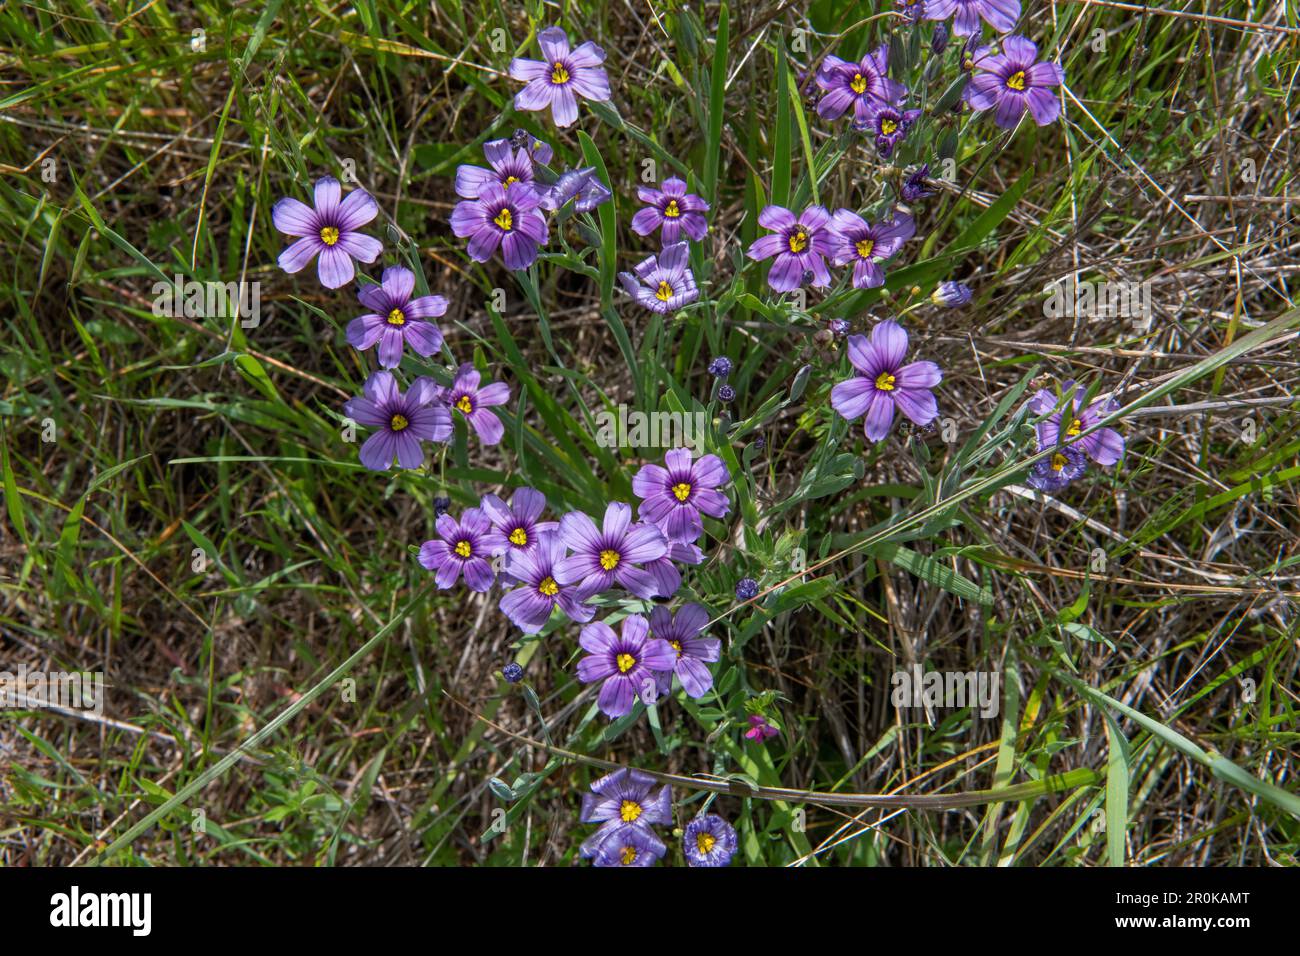 Western Blue-eyed Grass, Sisyrinchium bellum, a flowering plant blooming in Marin county in California. Stock Photo